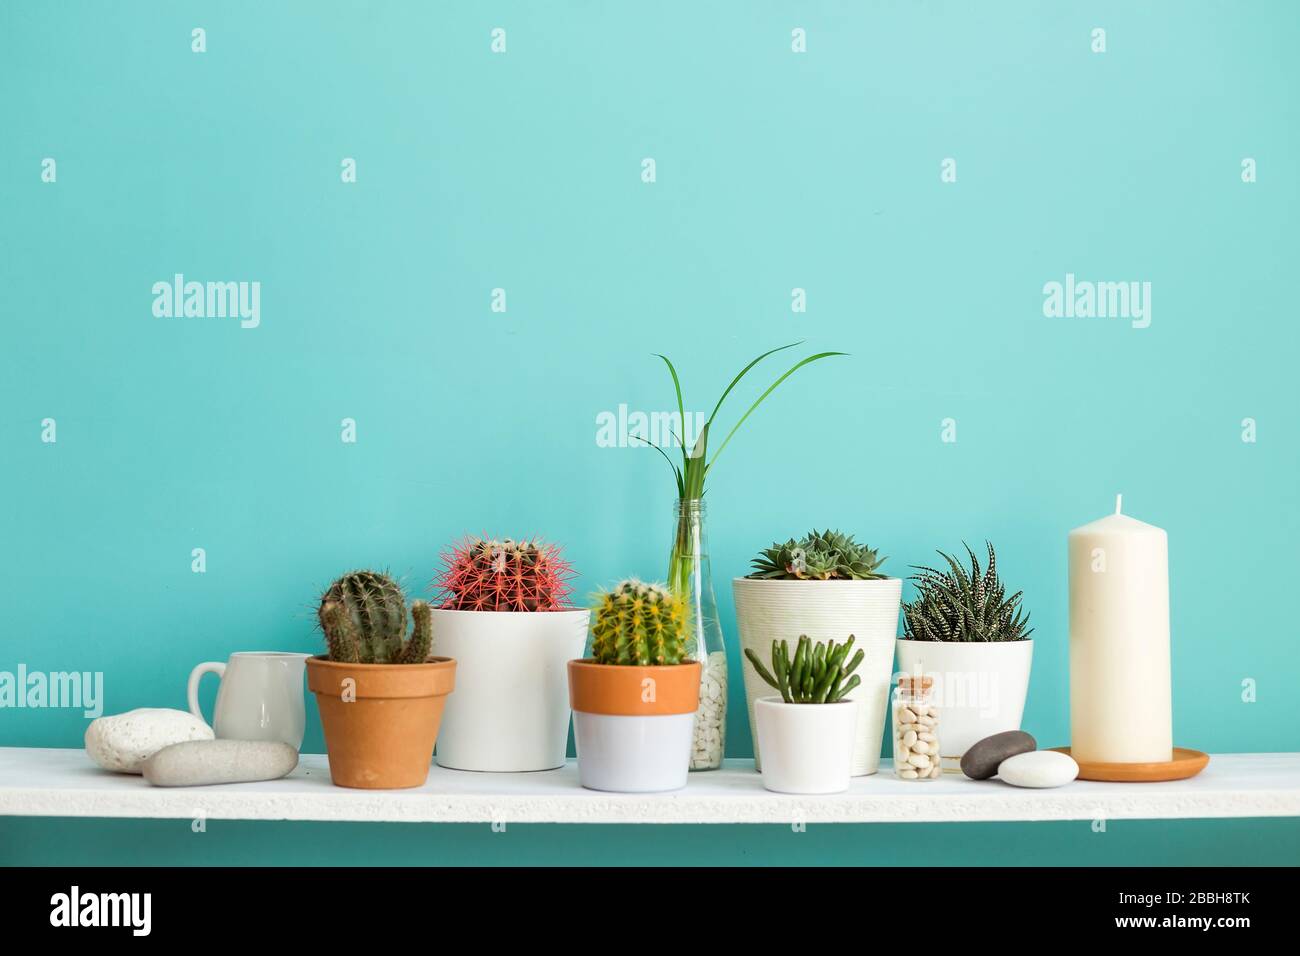 Download Modern Room Decoration With Picture Frame Mockup White Shelf Against Pastel Turquoise Wall With Collection Of Various Cactus And Succulent Plants In Stock Photo Alamy